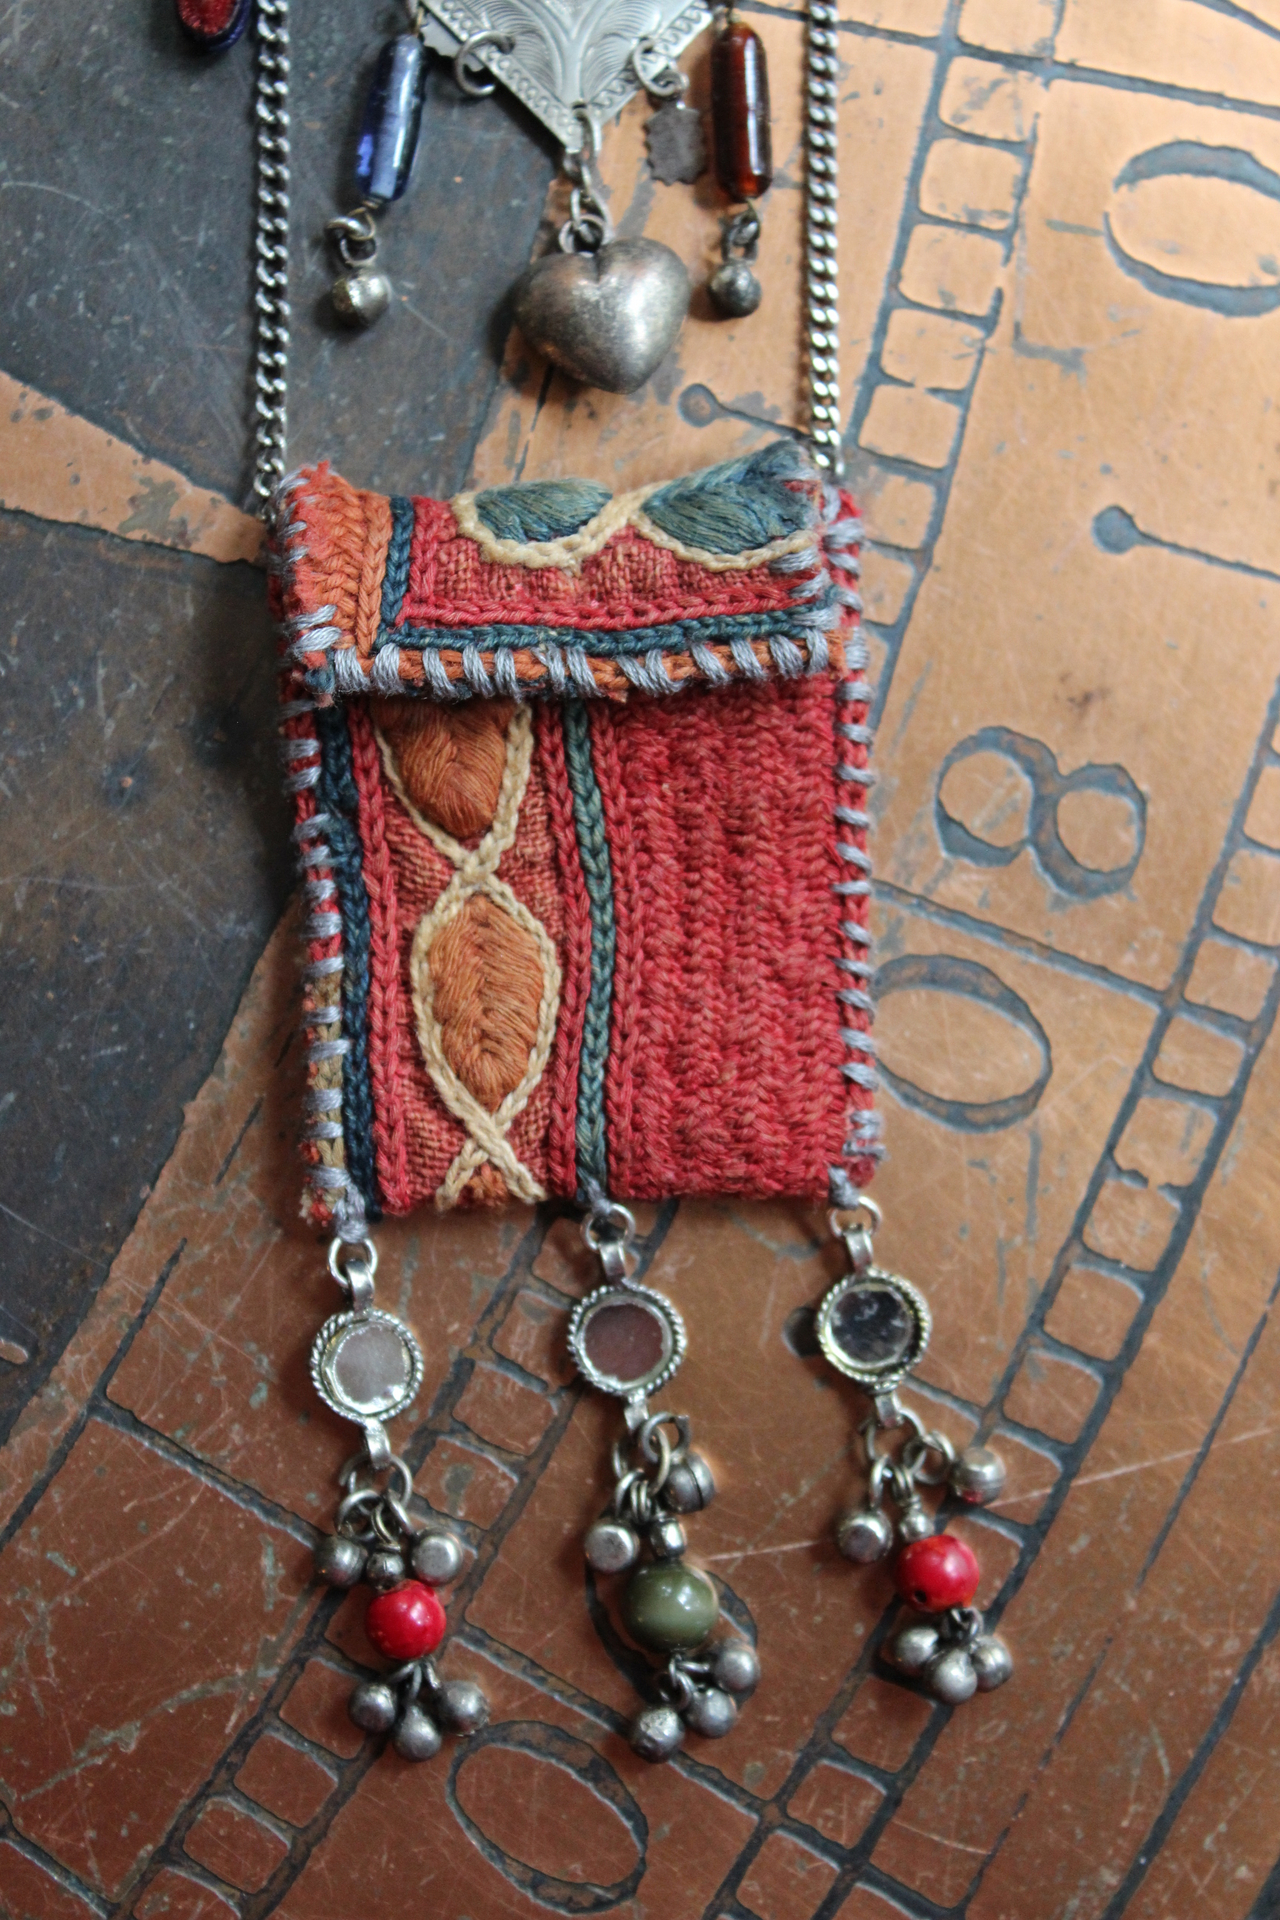 She Chooses Wisely Necklace with Small Antique Lambani Textile Pouch and Dozens of Antique & Vintage Drops, Medals and Findings